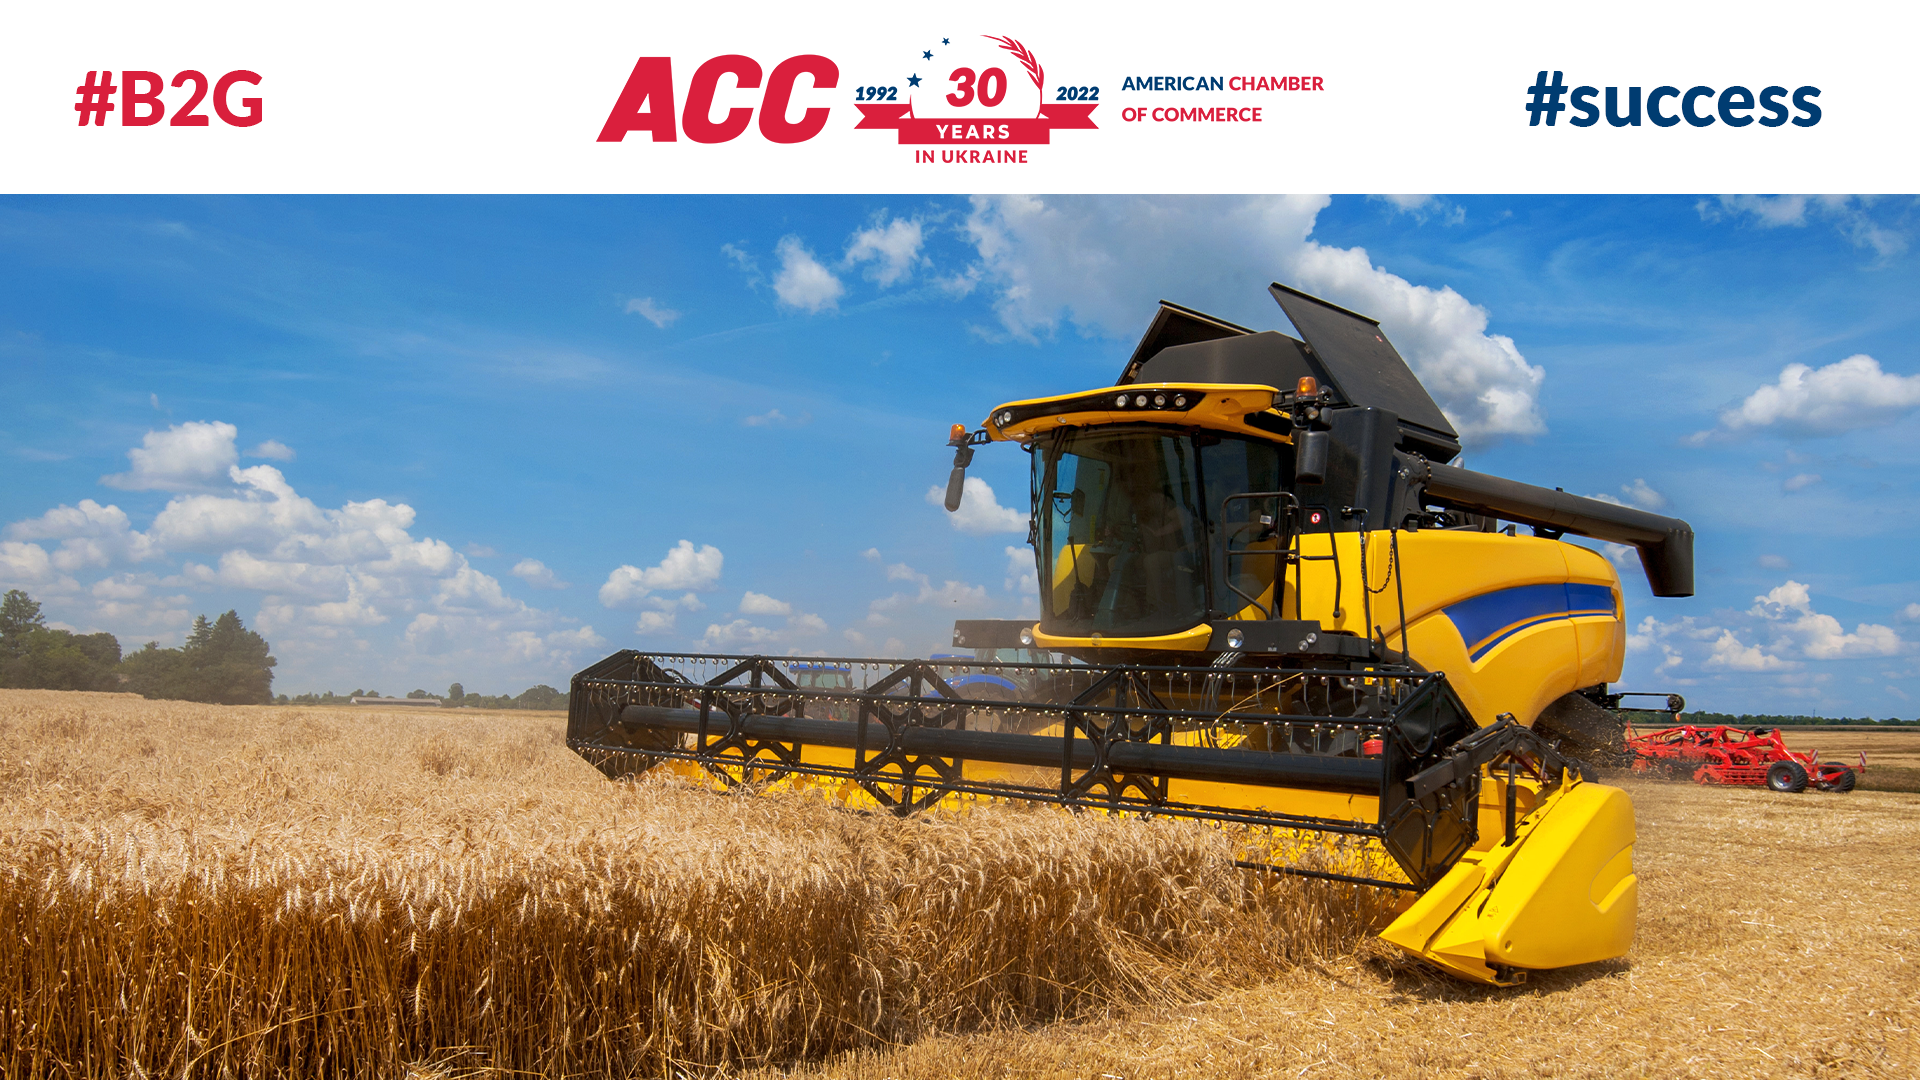 Policy Win: Parliament Adopted Draft Law #6070-1 Unblocking Certification of New Types of Agricultural Machinery